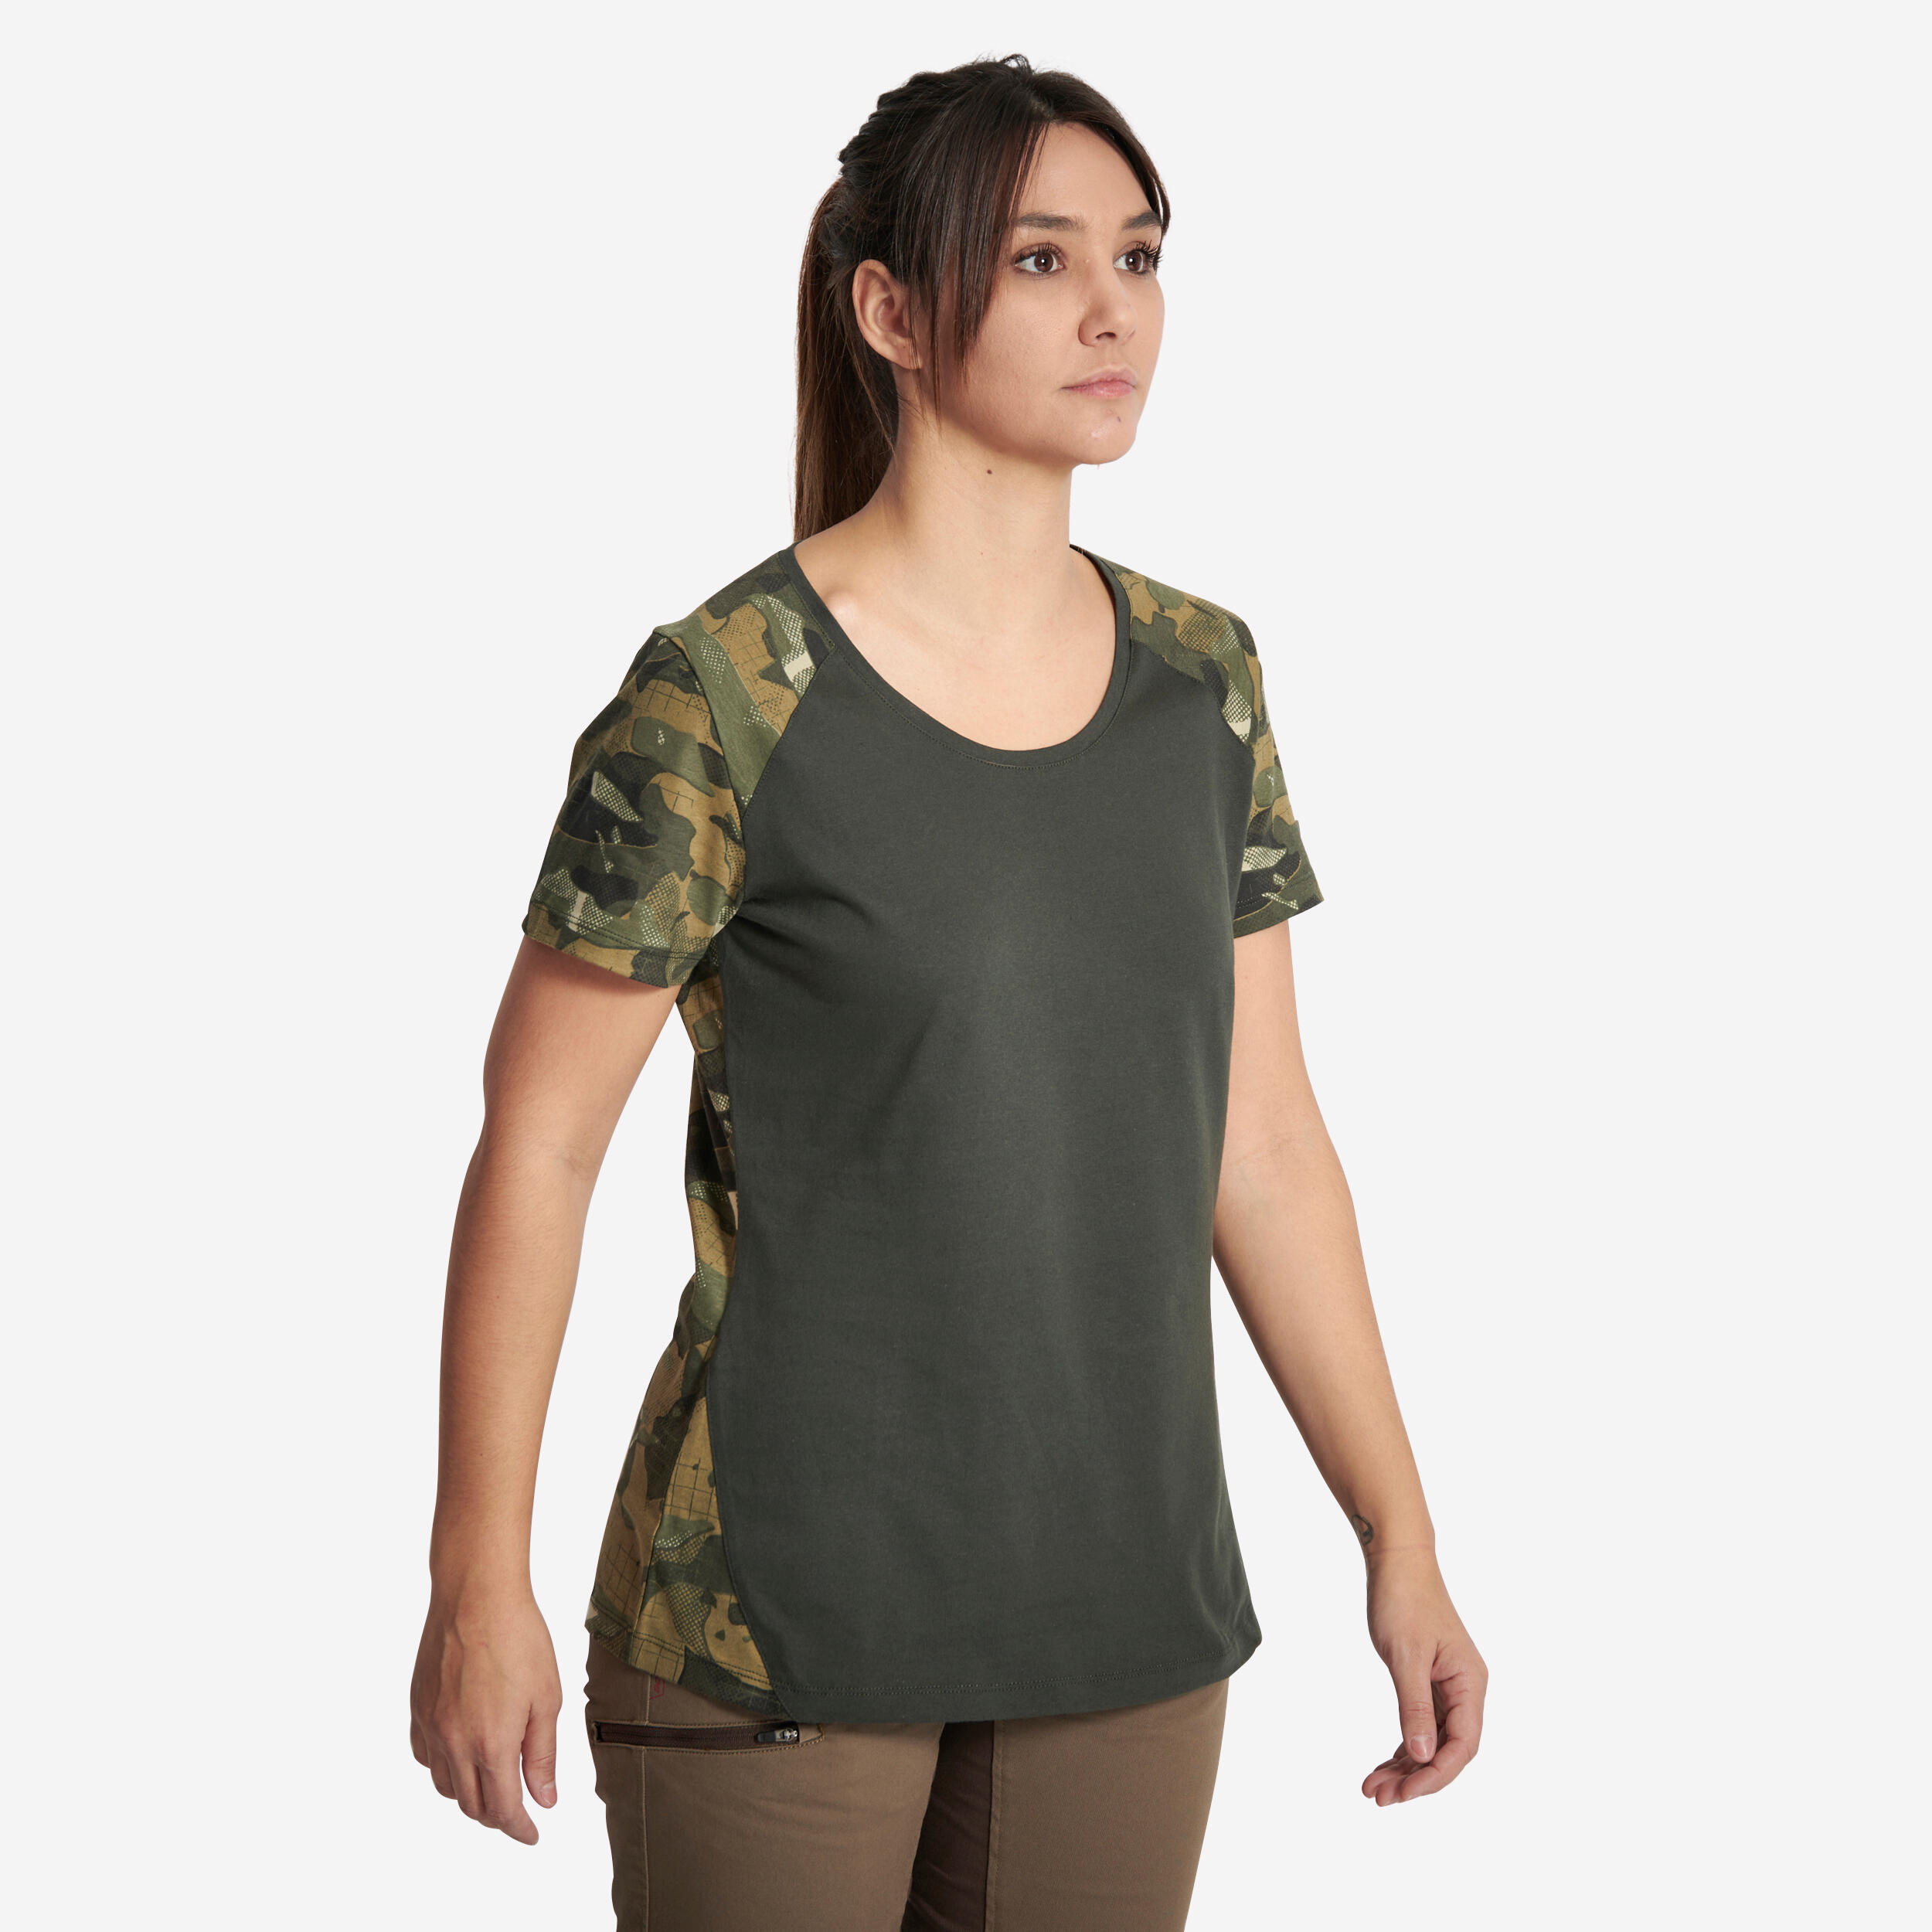 WOMEN'S SHORT-SLEEVED HUNTING T-SHIRT 300 COTTON CAMOUFLAGE GREEN 1/3